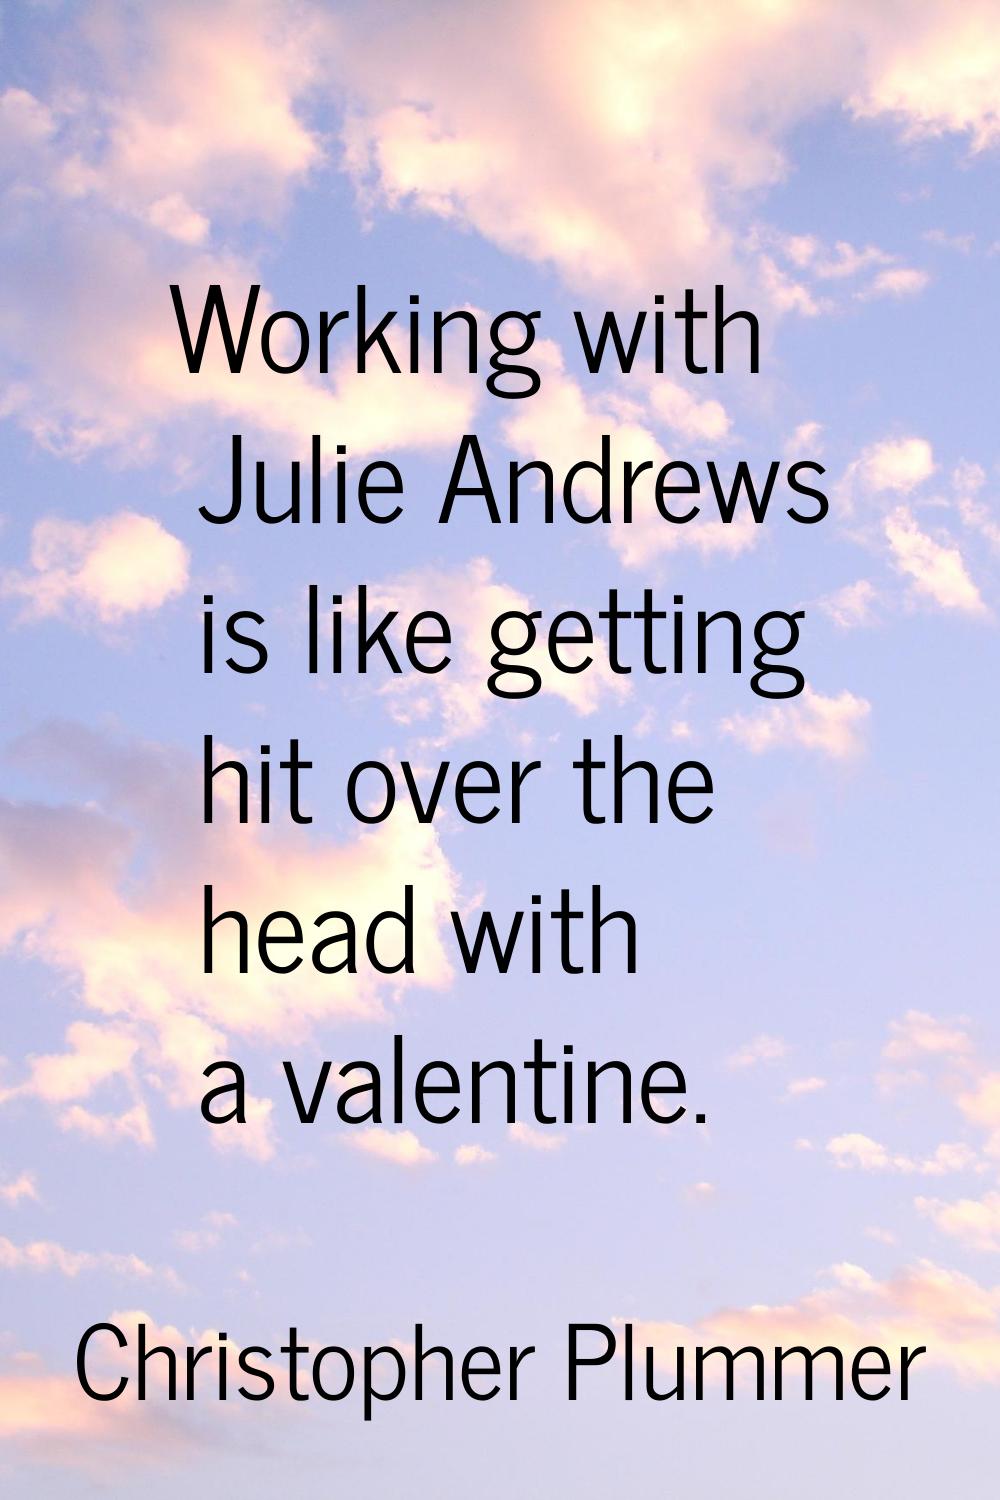 Working with Julie Andrews is like getting hit over the head with a valentine.